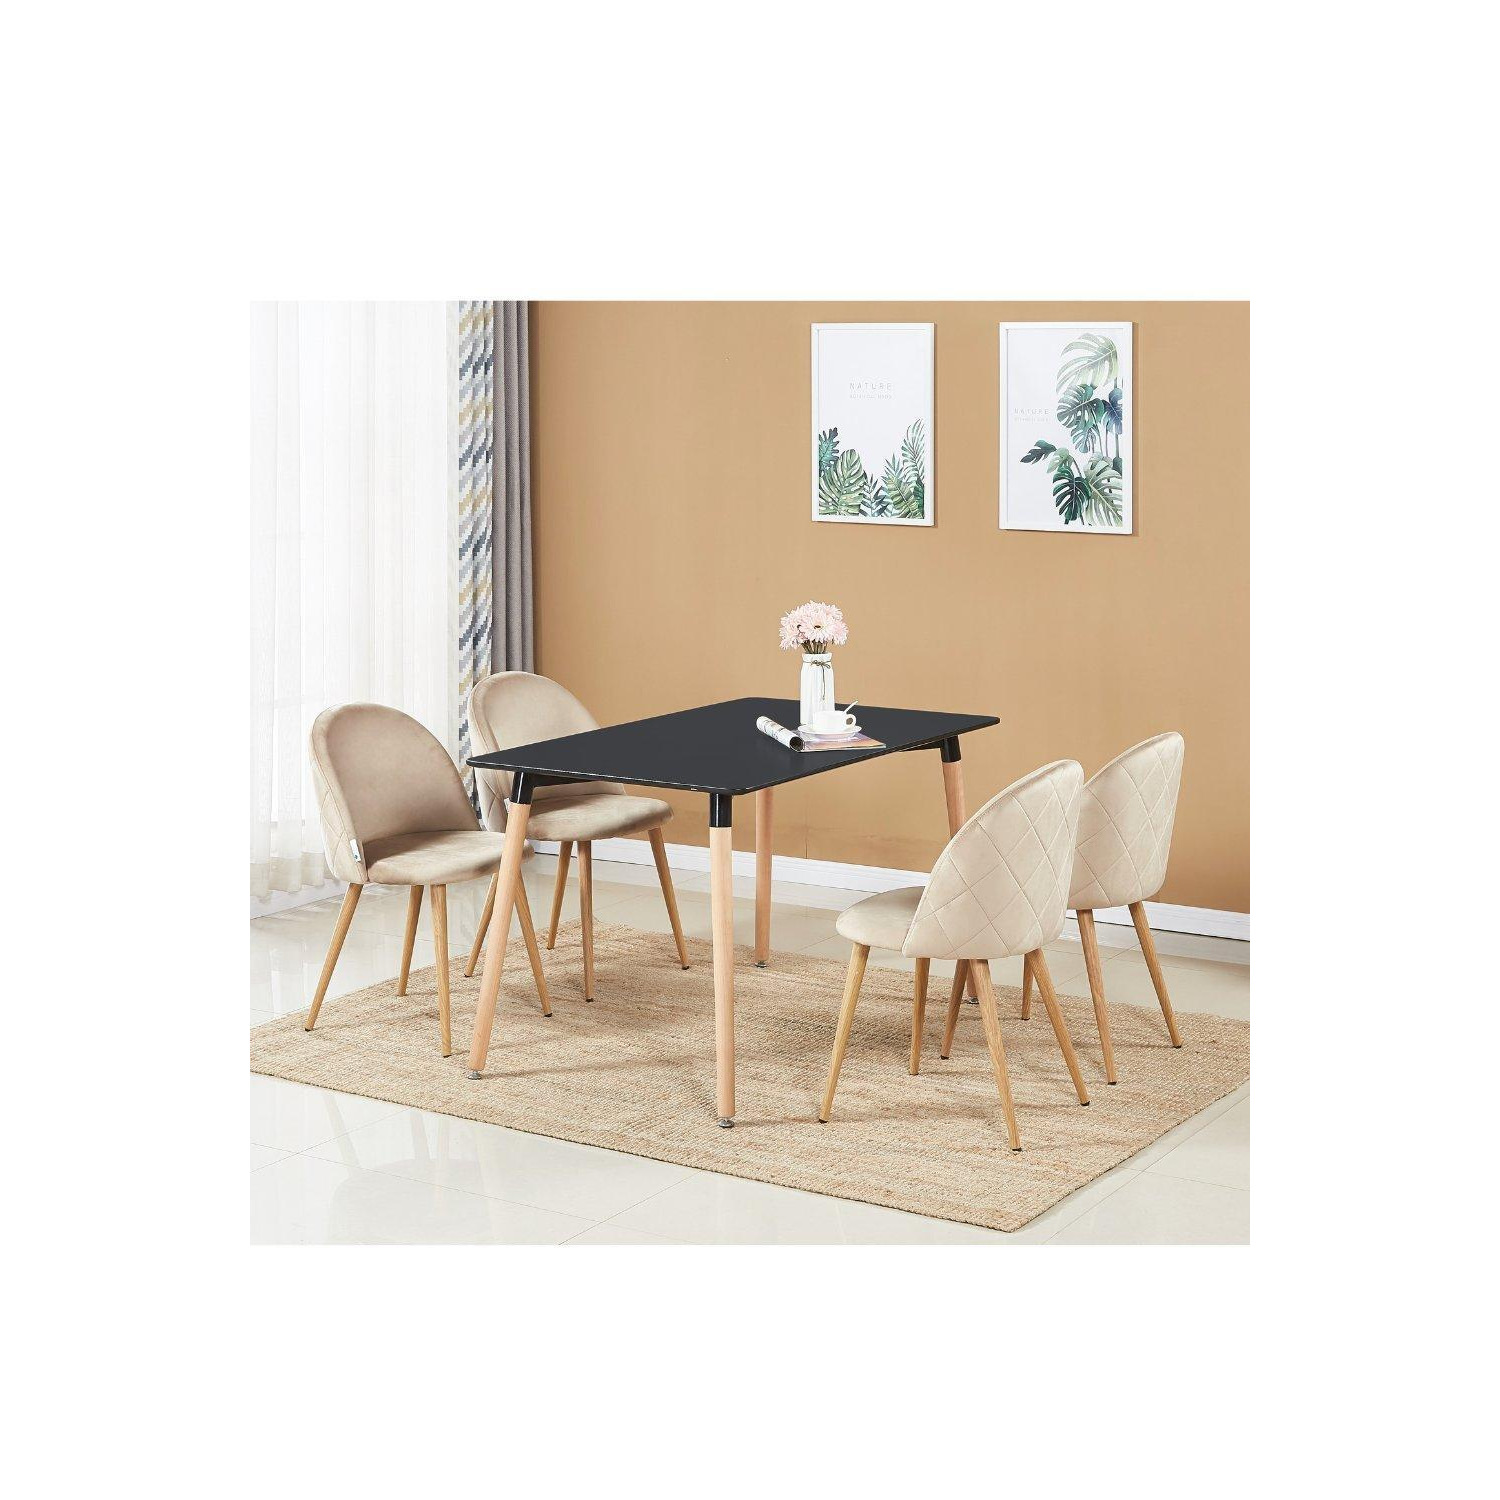 'Lucia Halo' Dining Set with a Table and Chairs Set of 4 - image 1